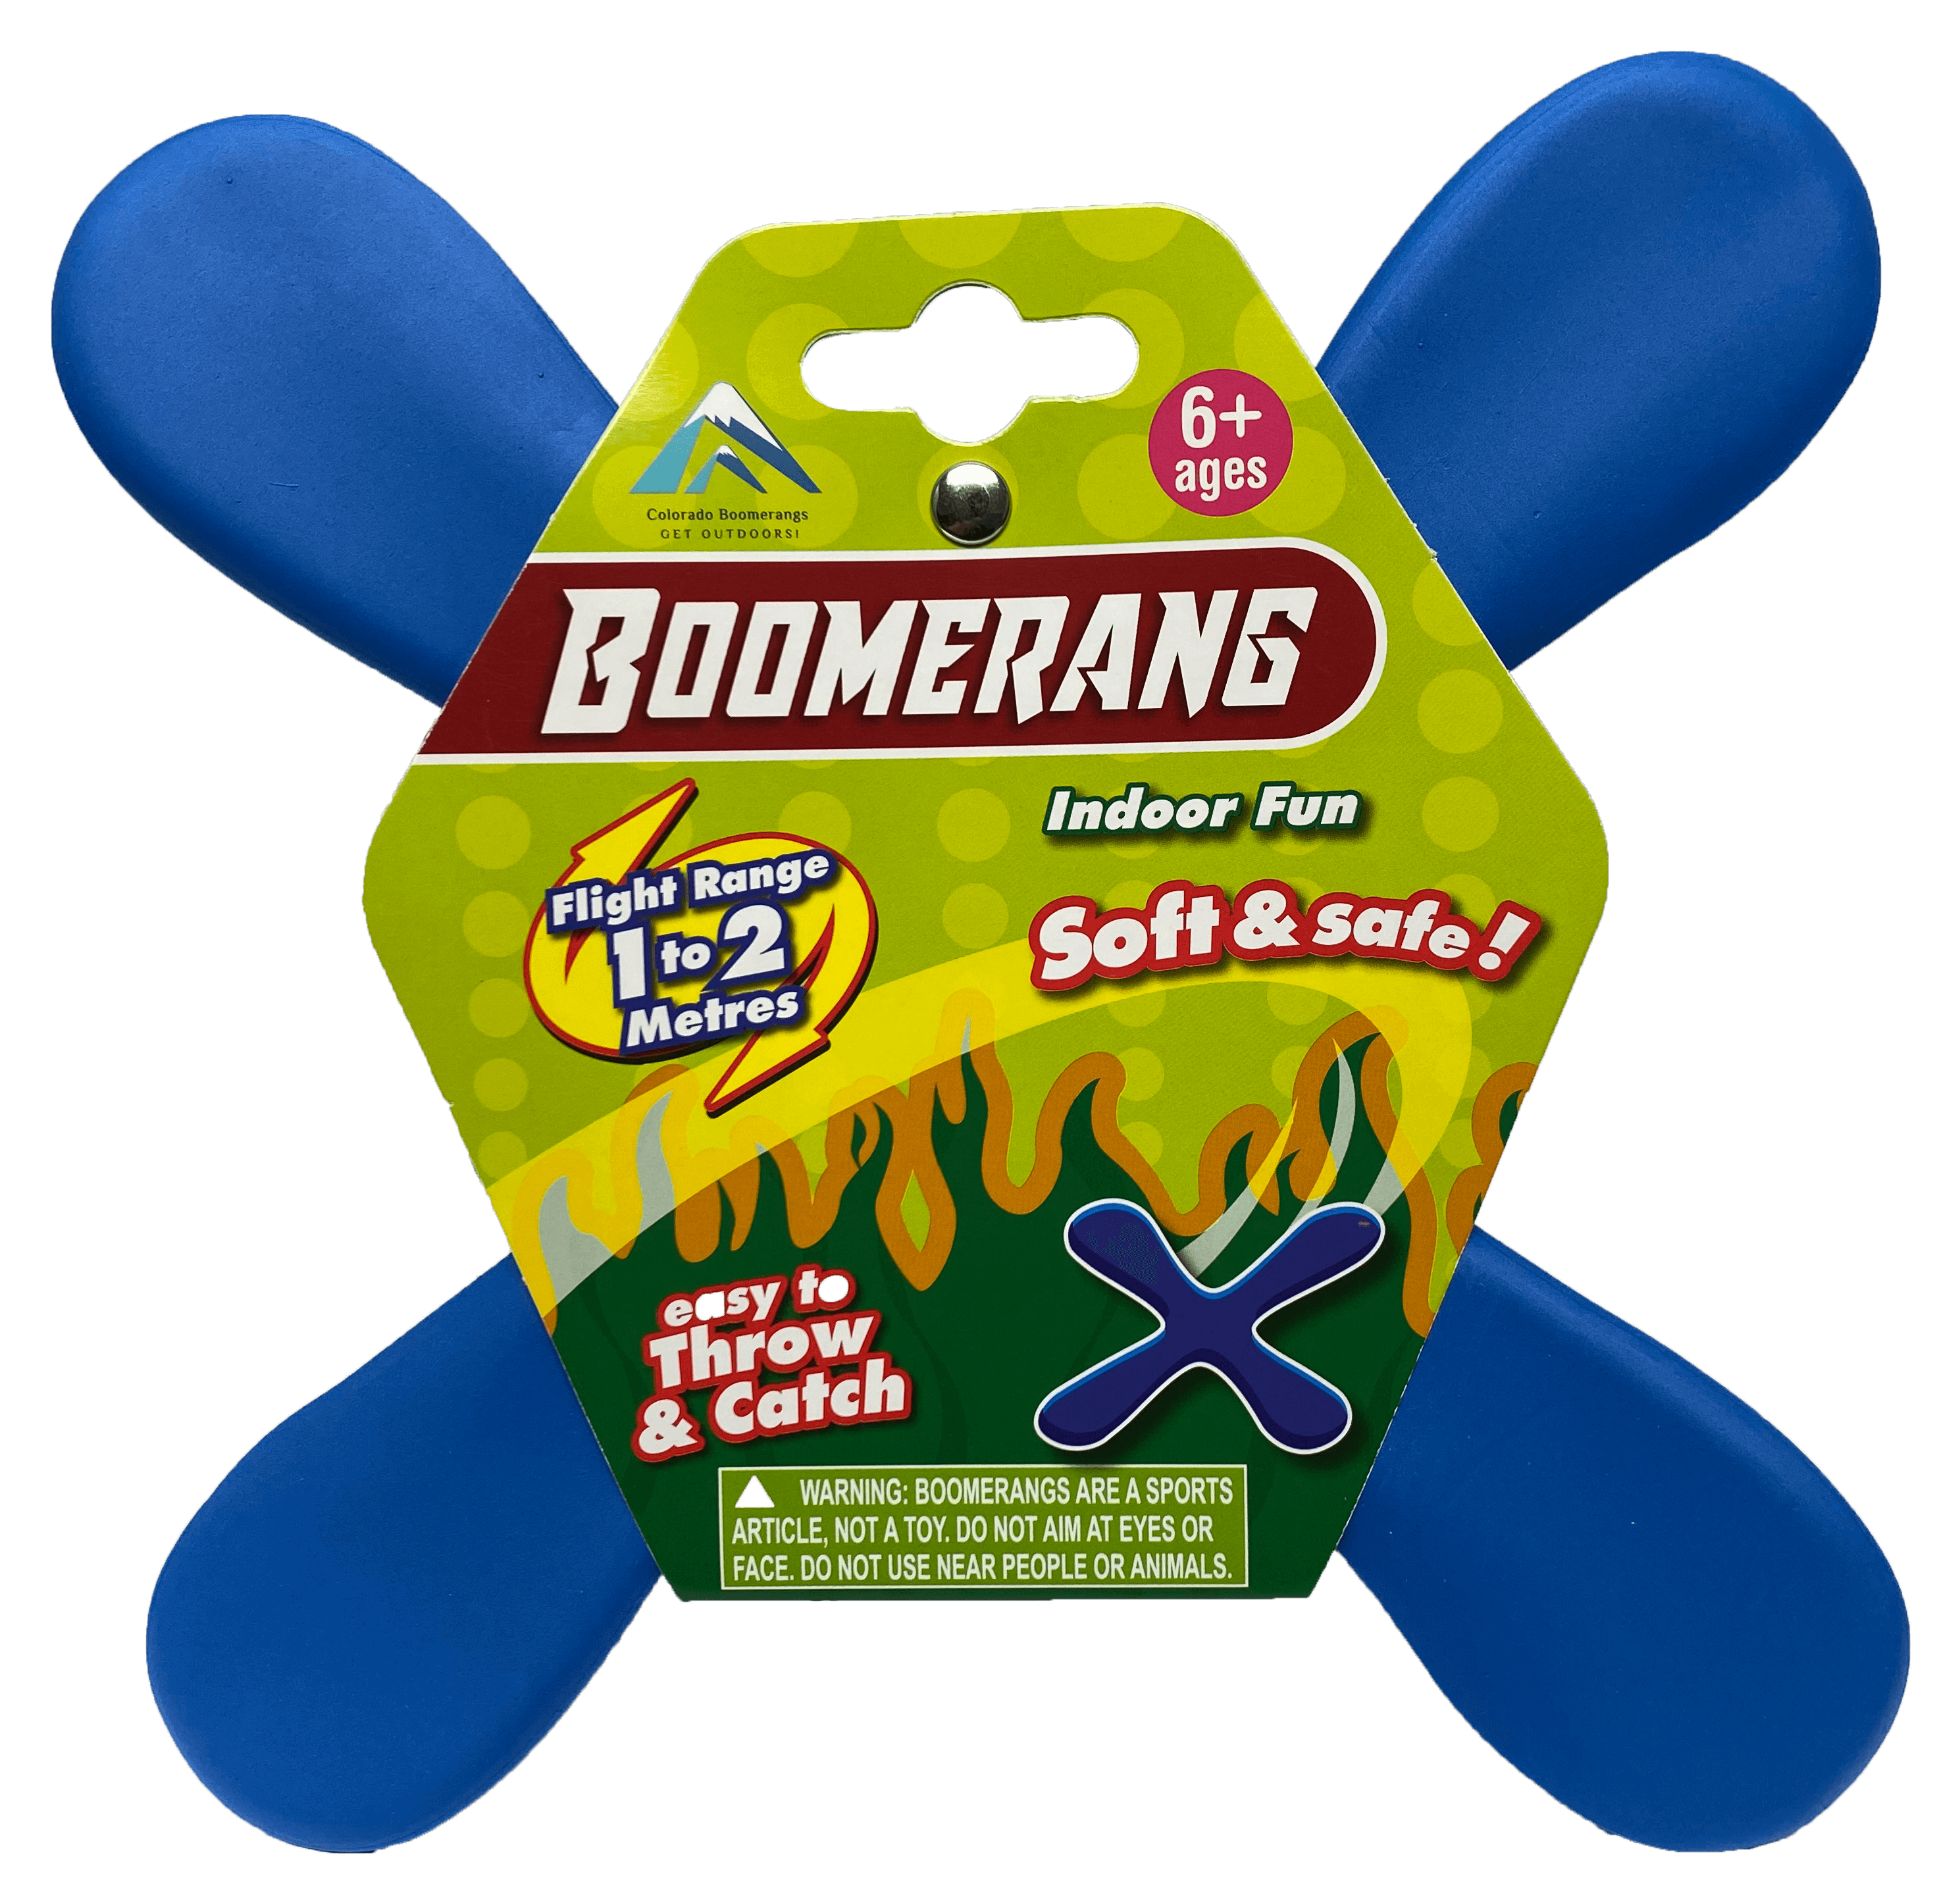 Indoor Boomerangs - Soft and short range for inside the house boomerang fun!